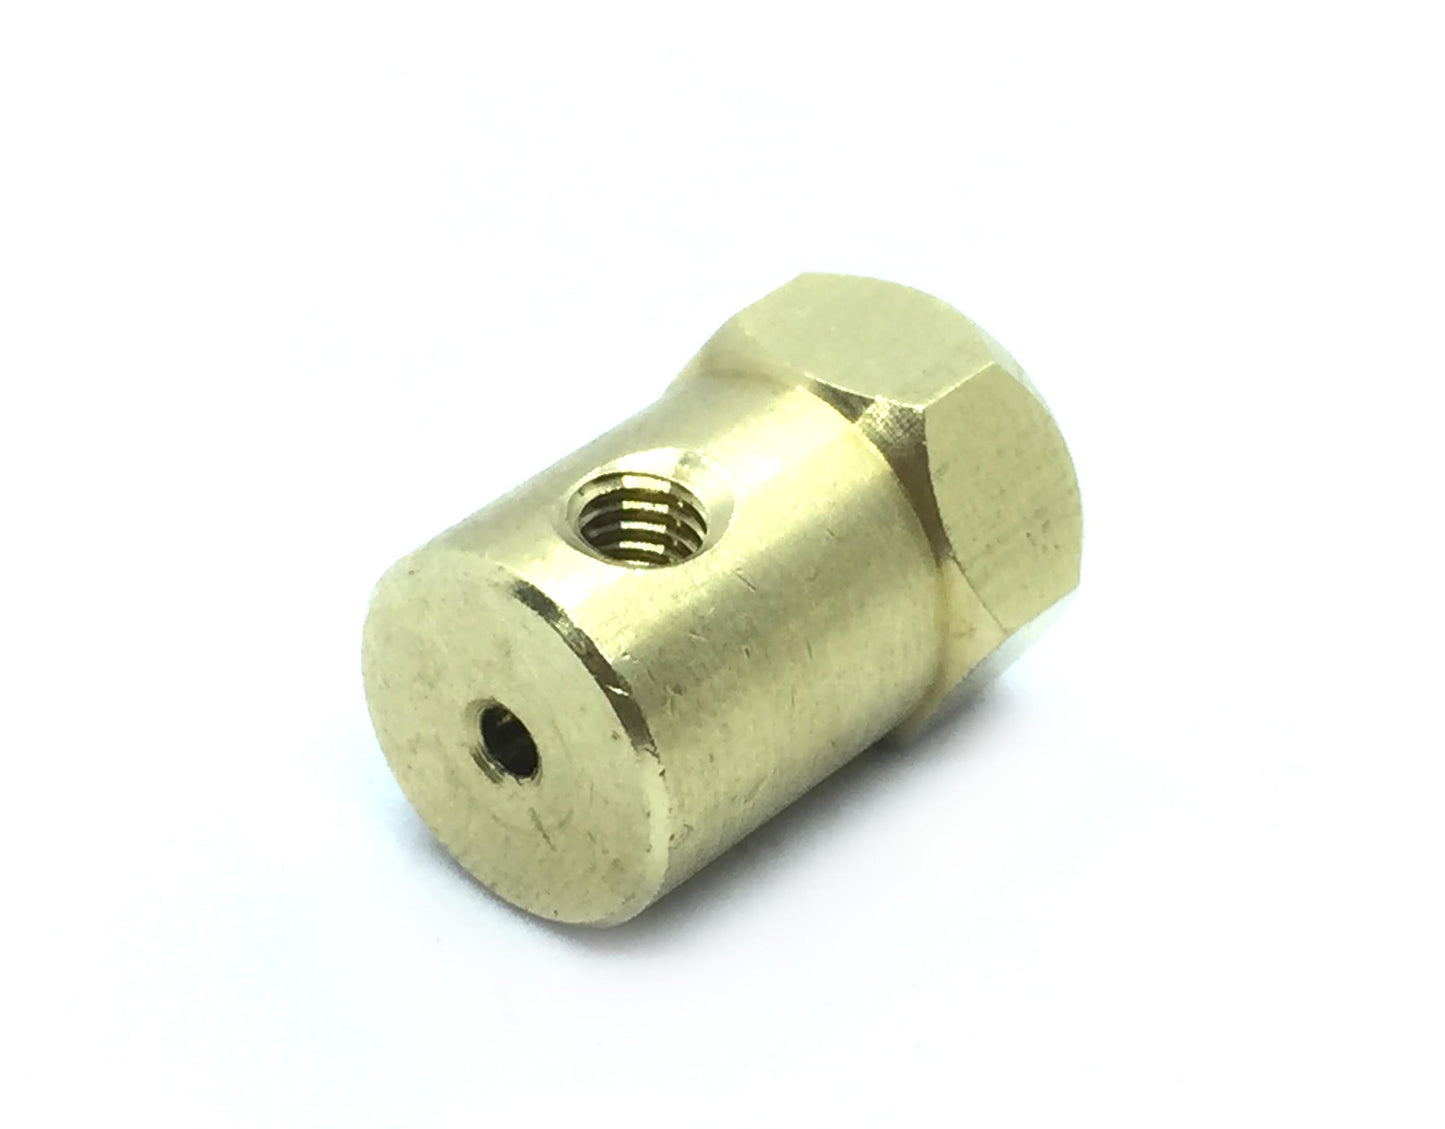 Coupling 2mm Hexagon Brass for Motor Shafts and Wheels